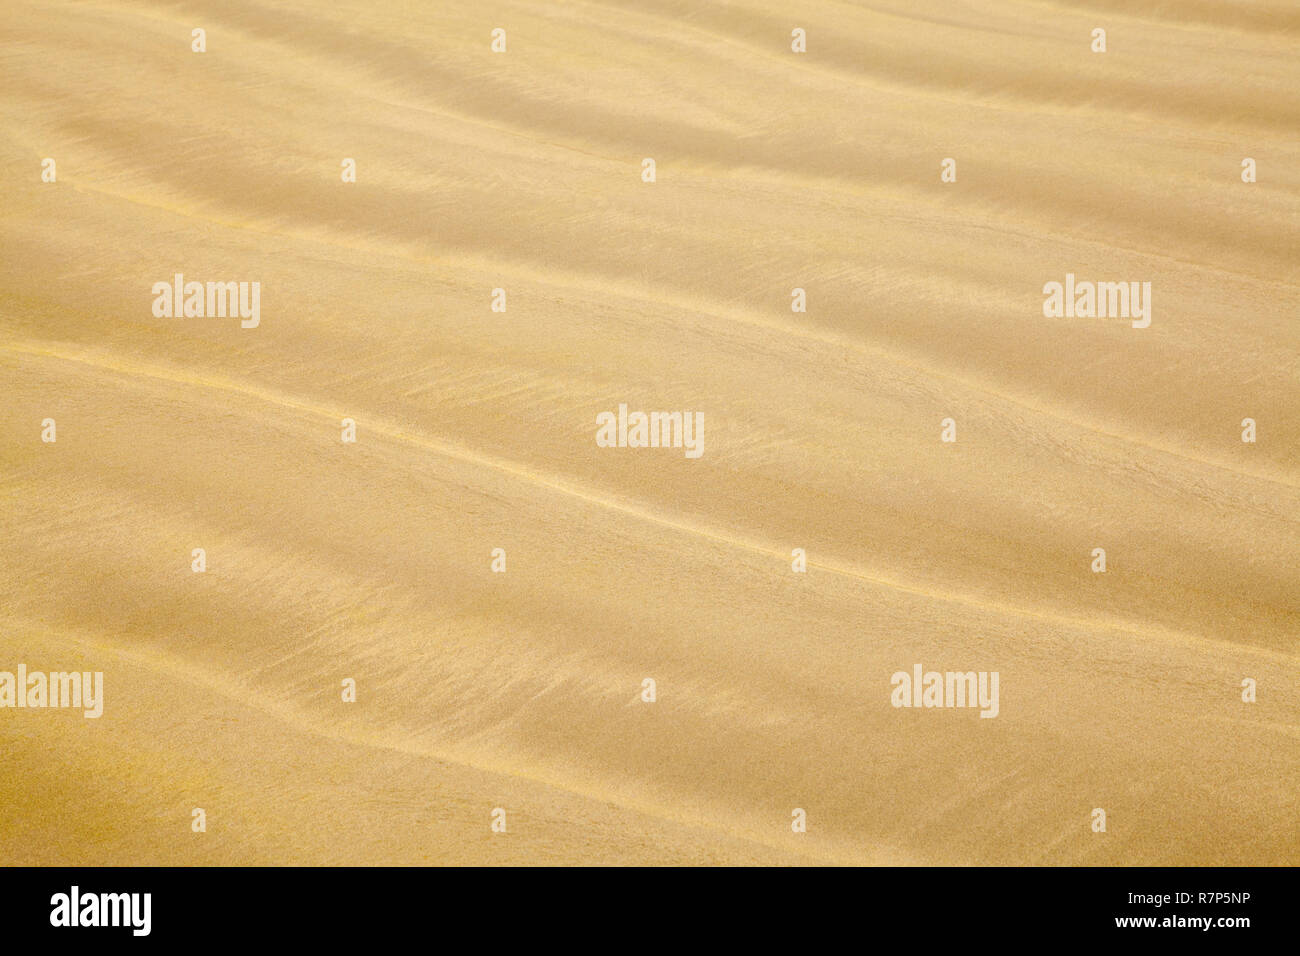 Beach Sand With Wave Ripple Pattern Background. Stock Photo